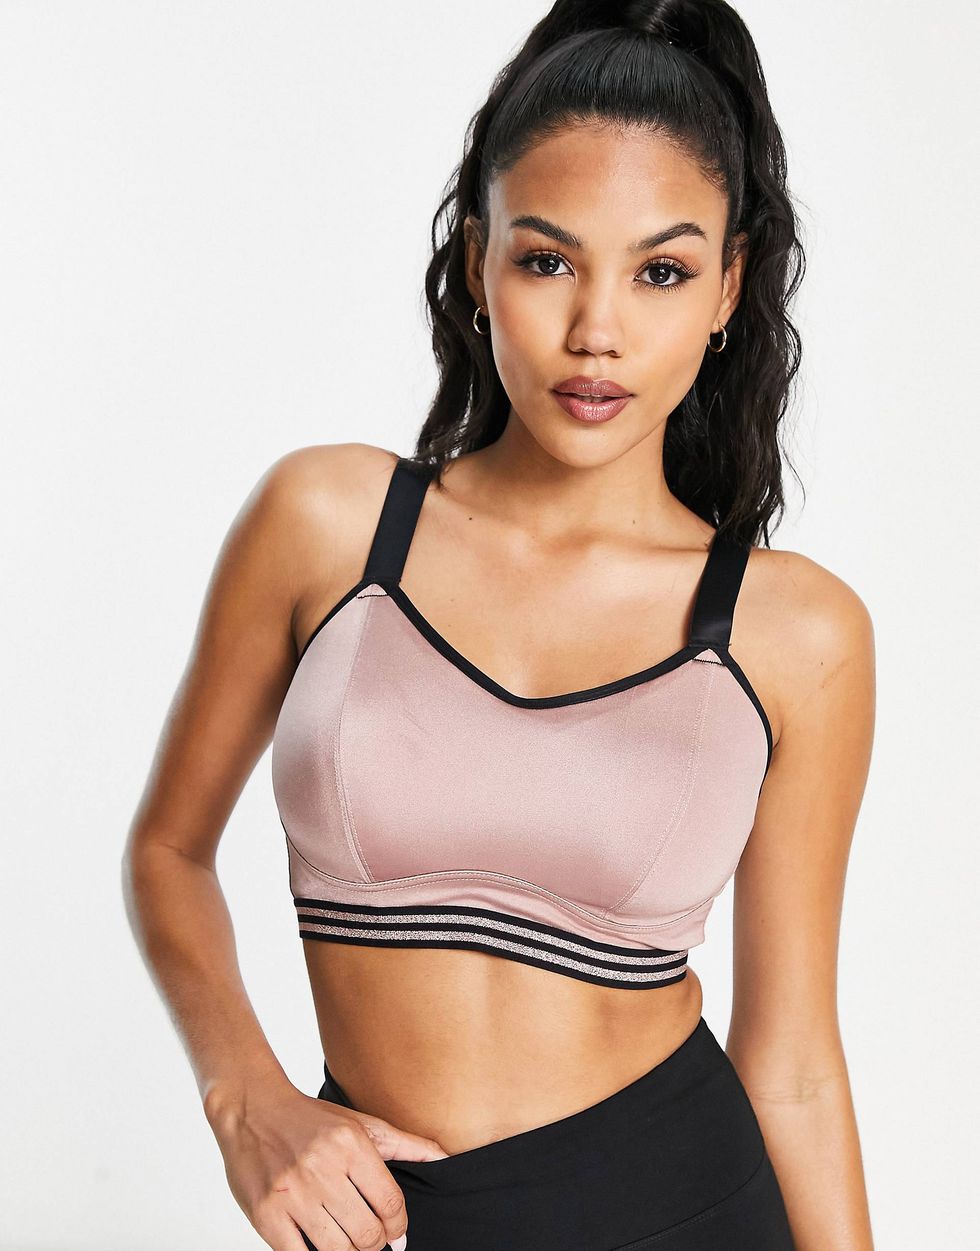 I have big boobs but have found the best sports bra to stop the